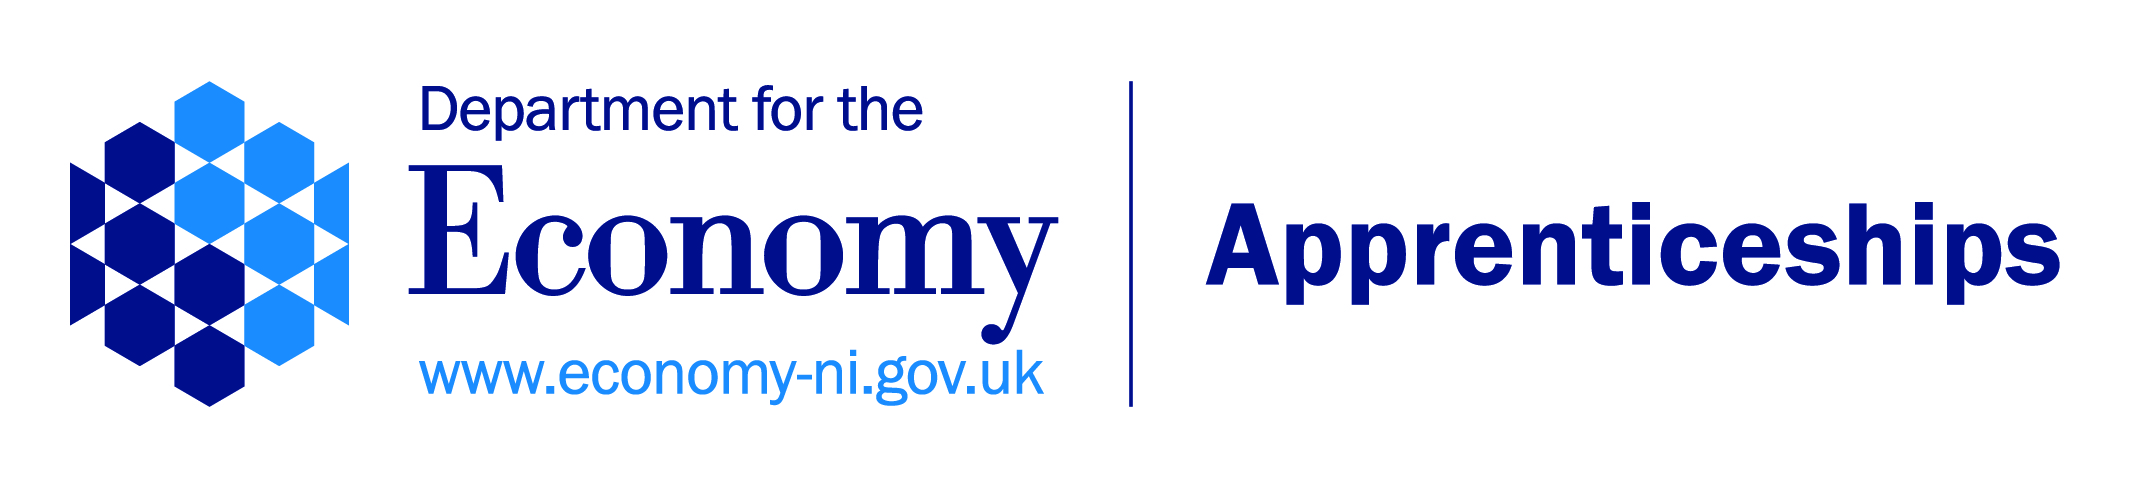 DfE logo and word apprenticeships